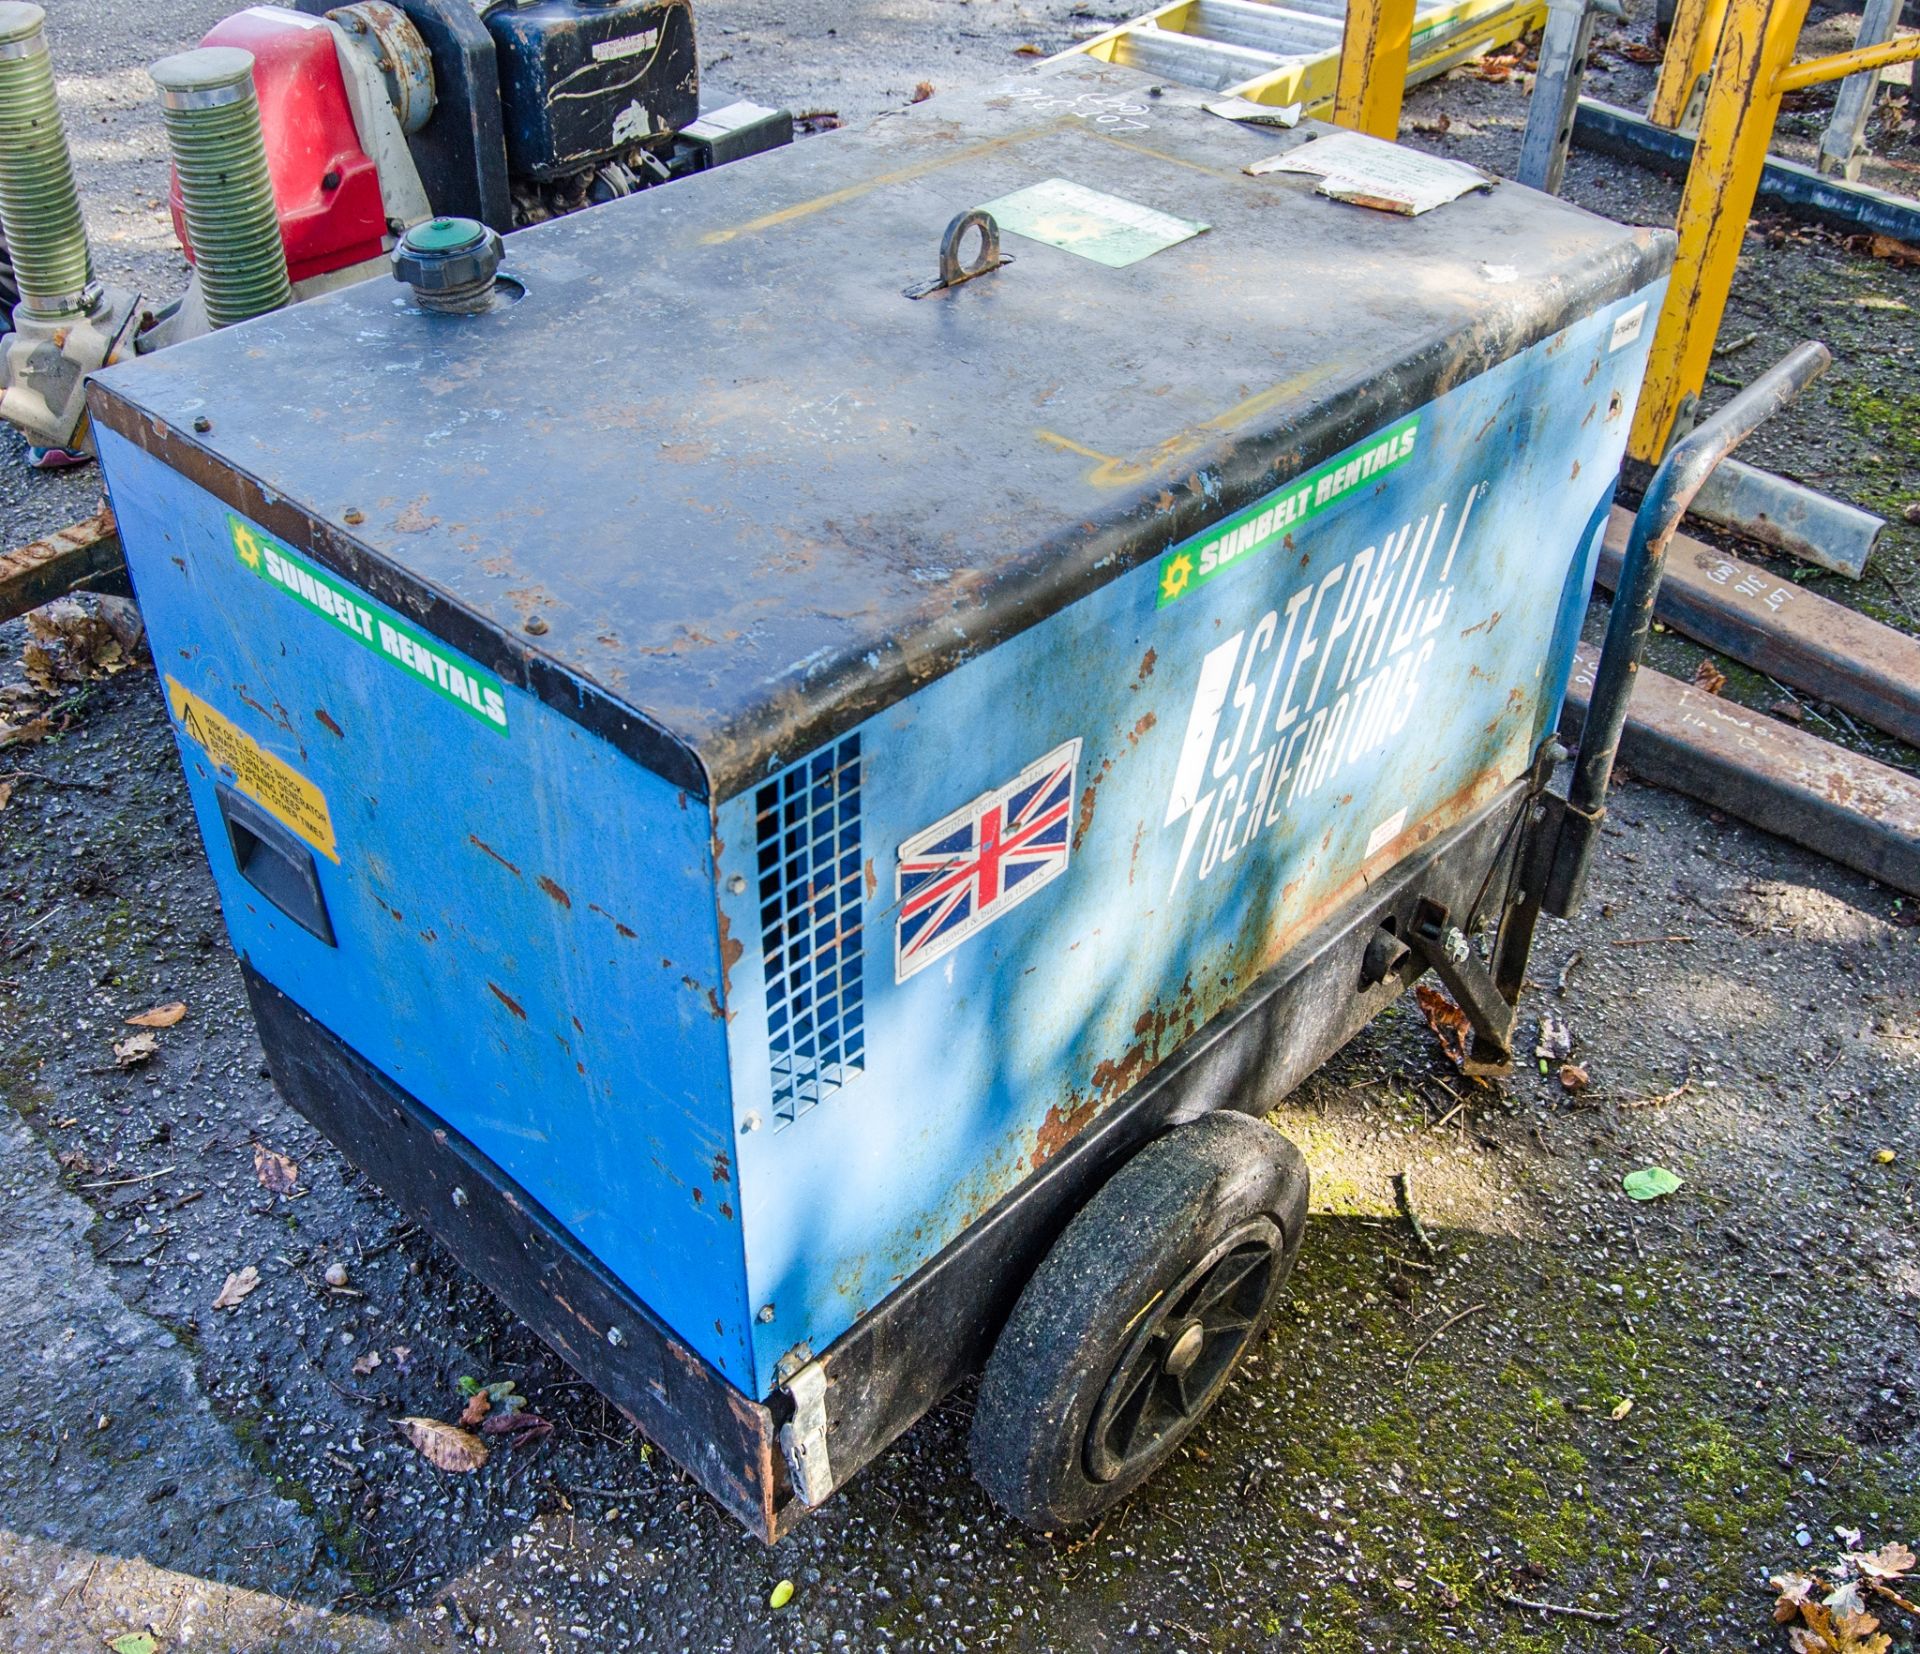 Stephill 6 kva diesel driven generator Recorded hours: 2875 A742921 - Image 2 of 4